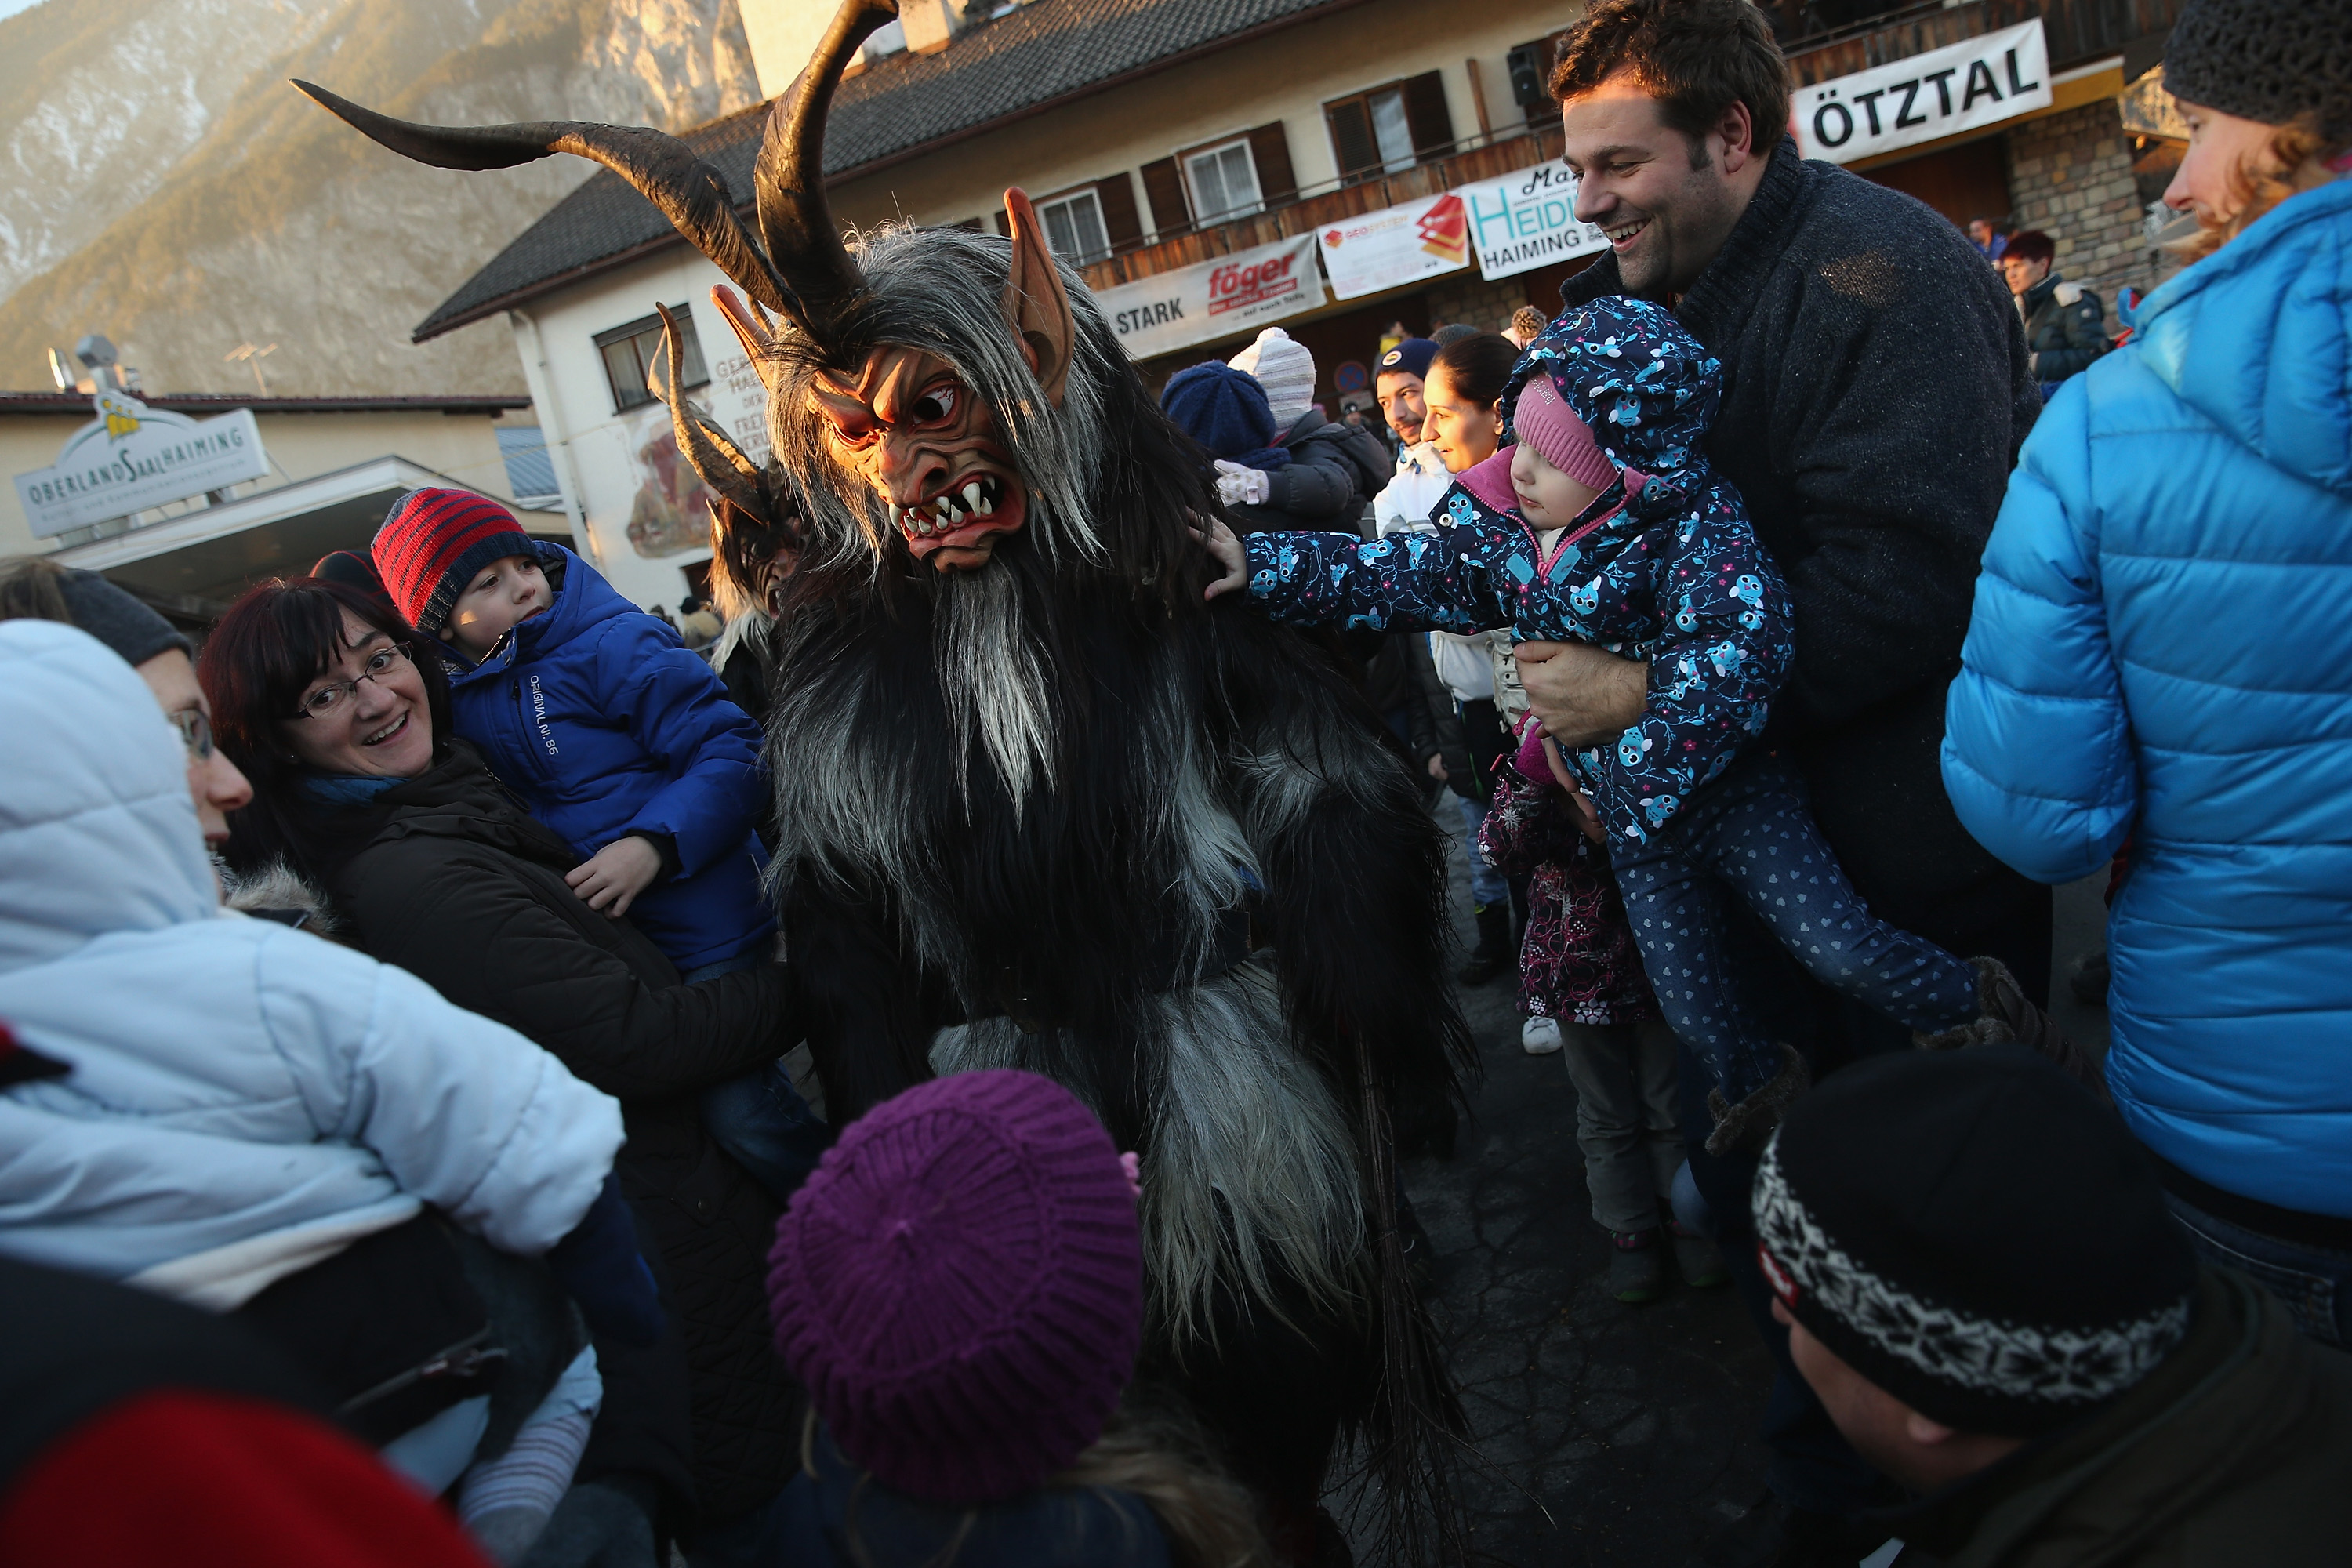 A member of the Haiminger Krampusgruppe dressed as the Krampus creature, an Austrian winter solstice ritual, lets himself be touched by onlookers prior to the annual Krampus night in Tyrol on Dec. 1, 2013. (Sean Gallup—Getty Images)